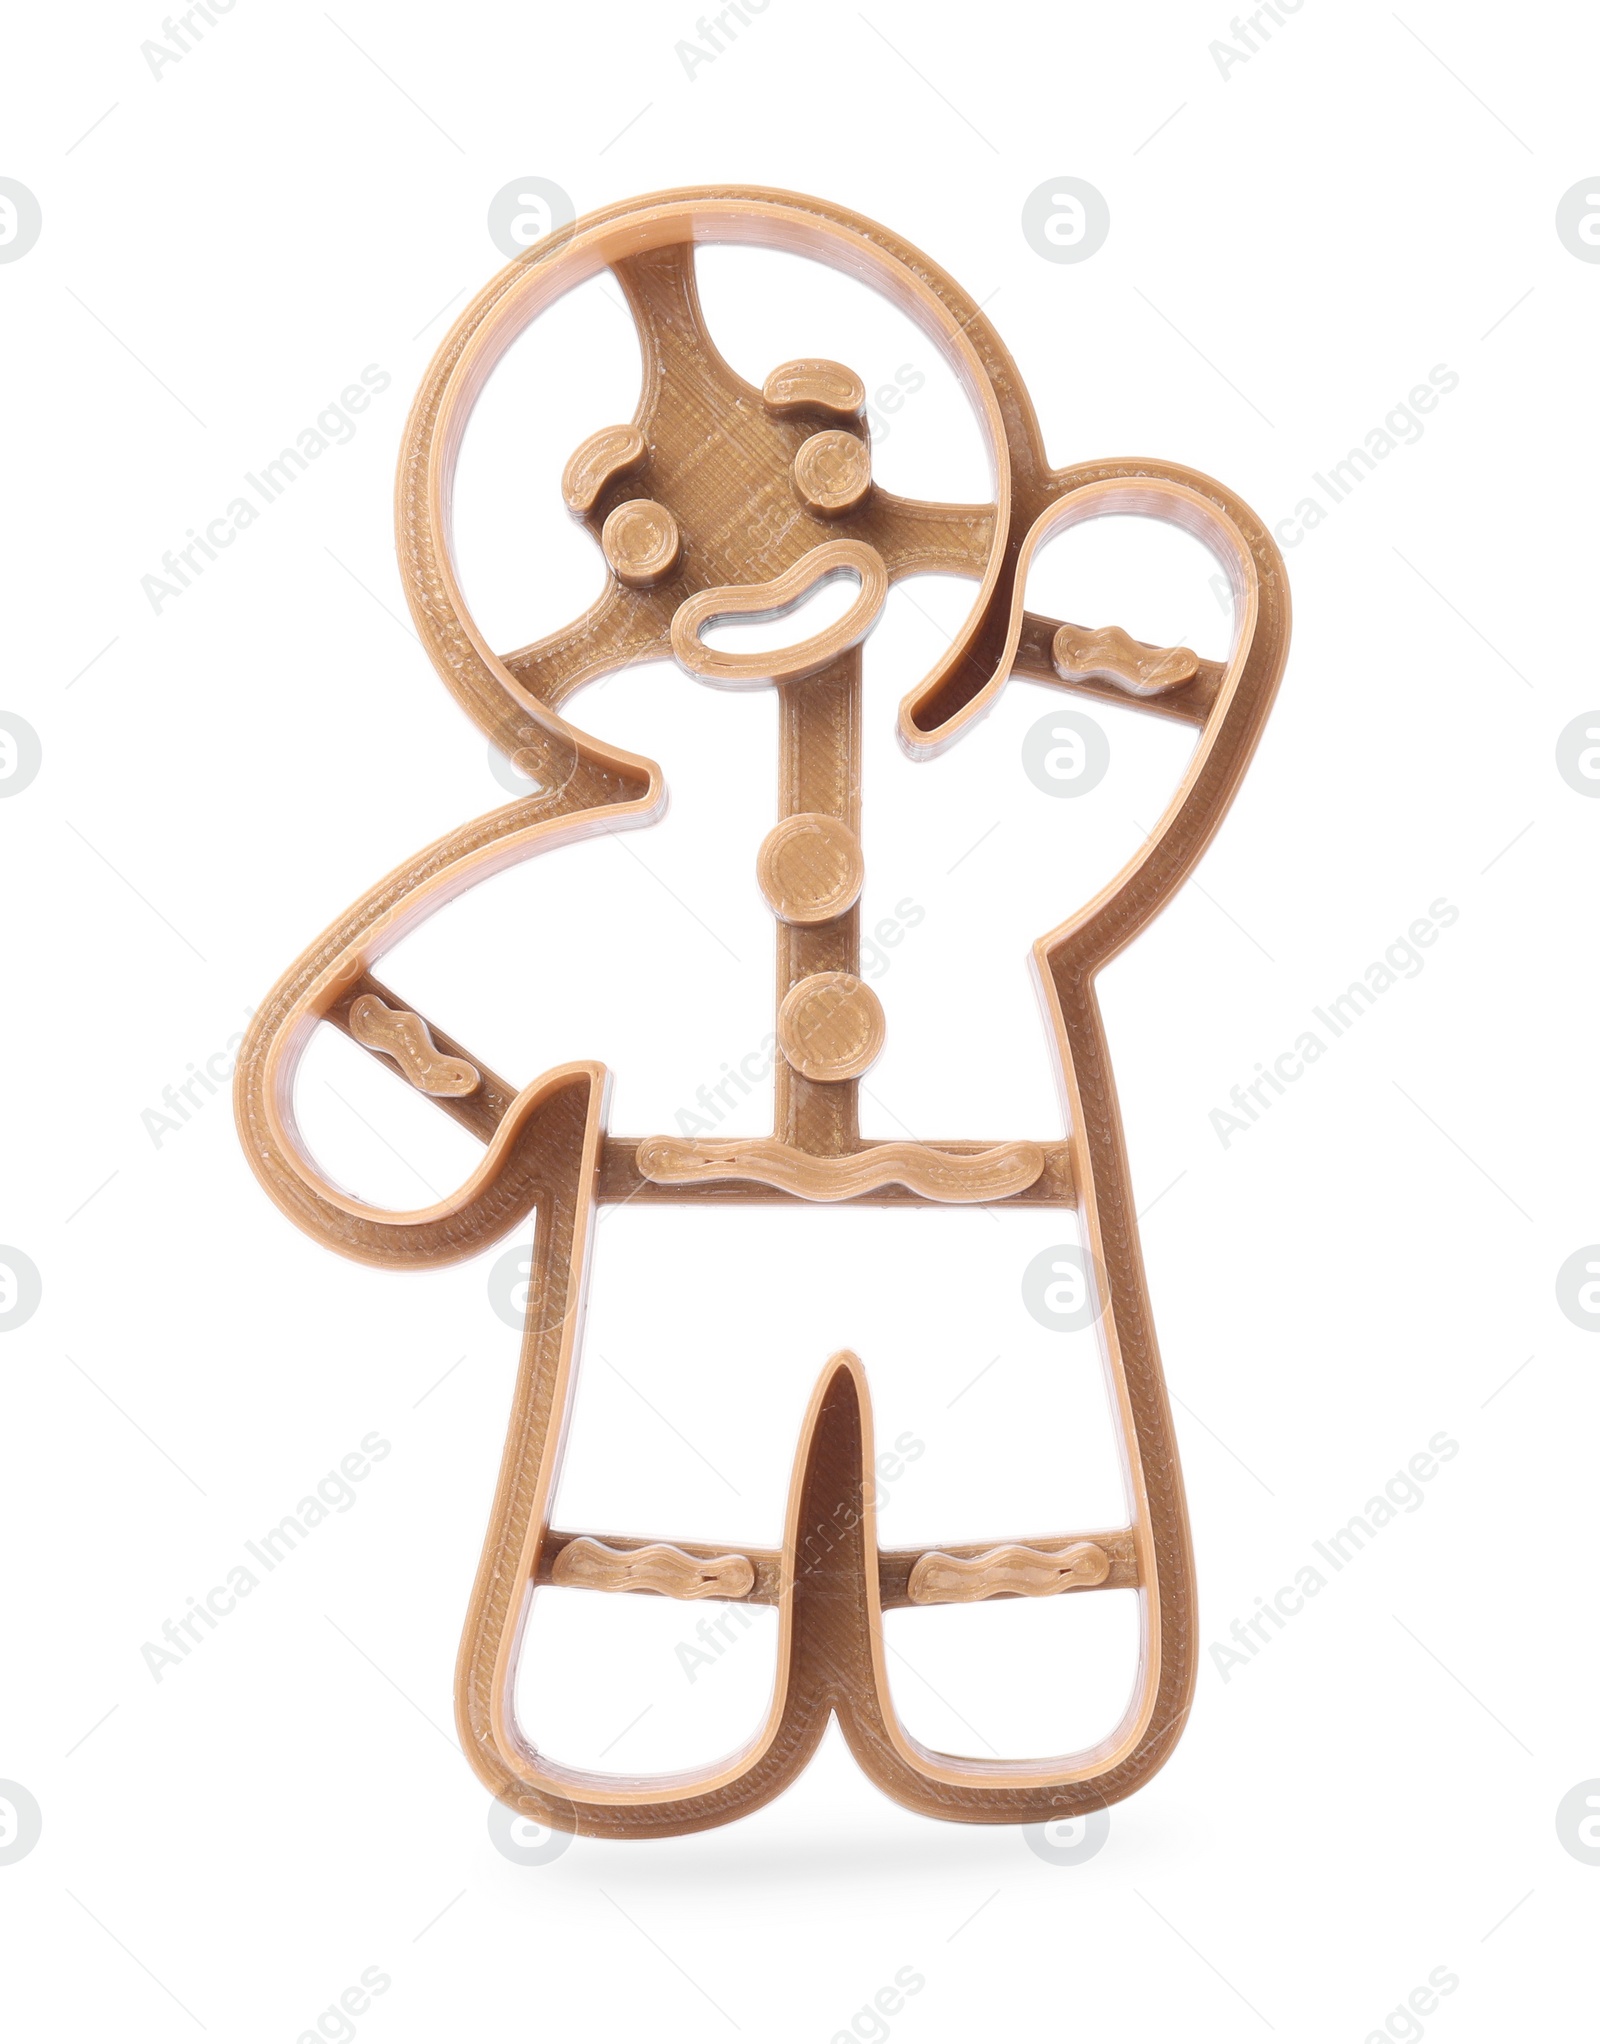 Photo of Cookie cutter in shape of man isolated on white